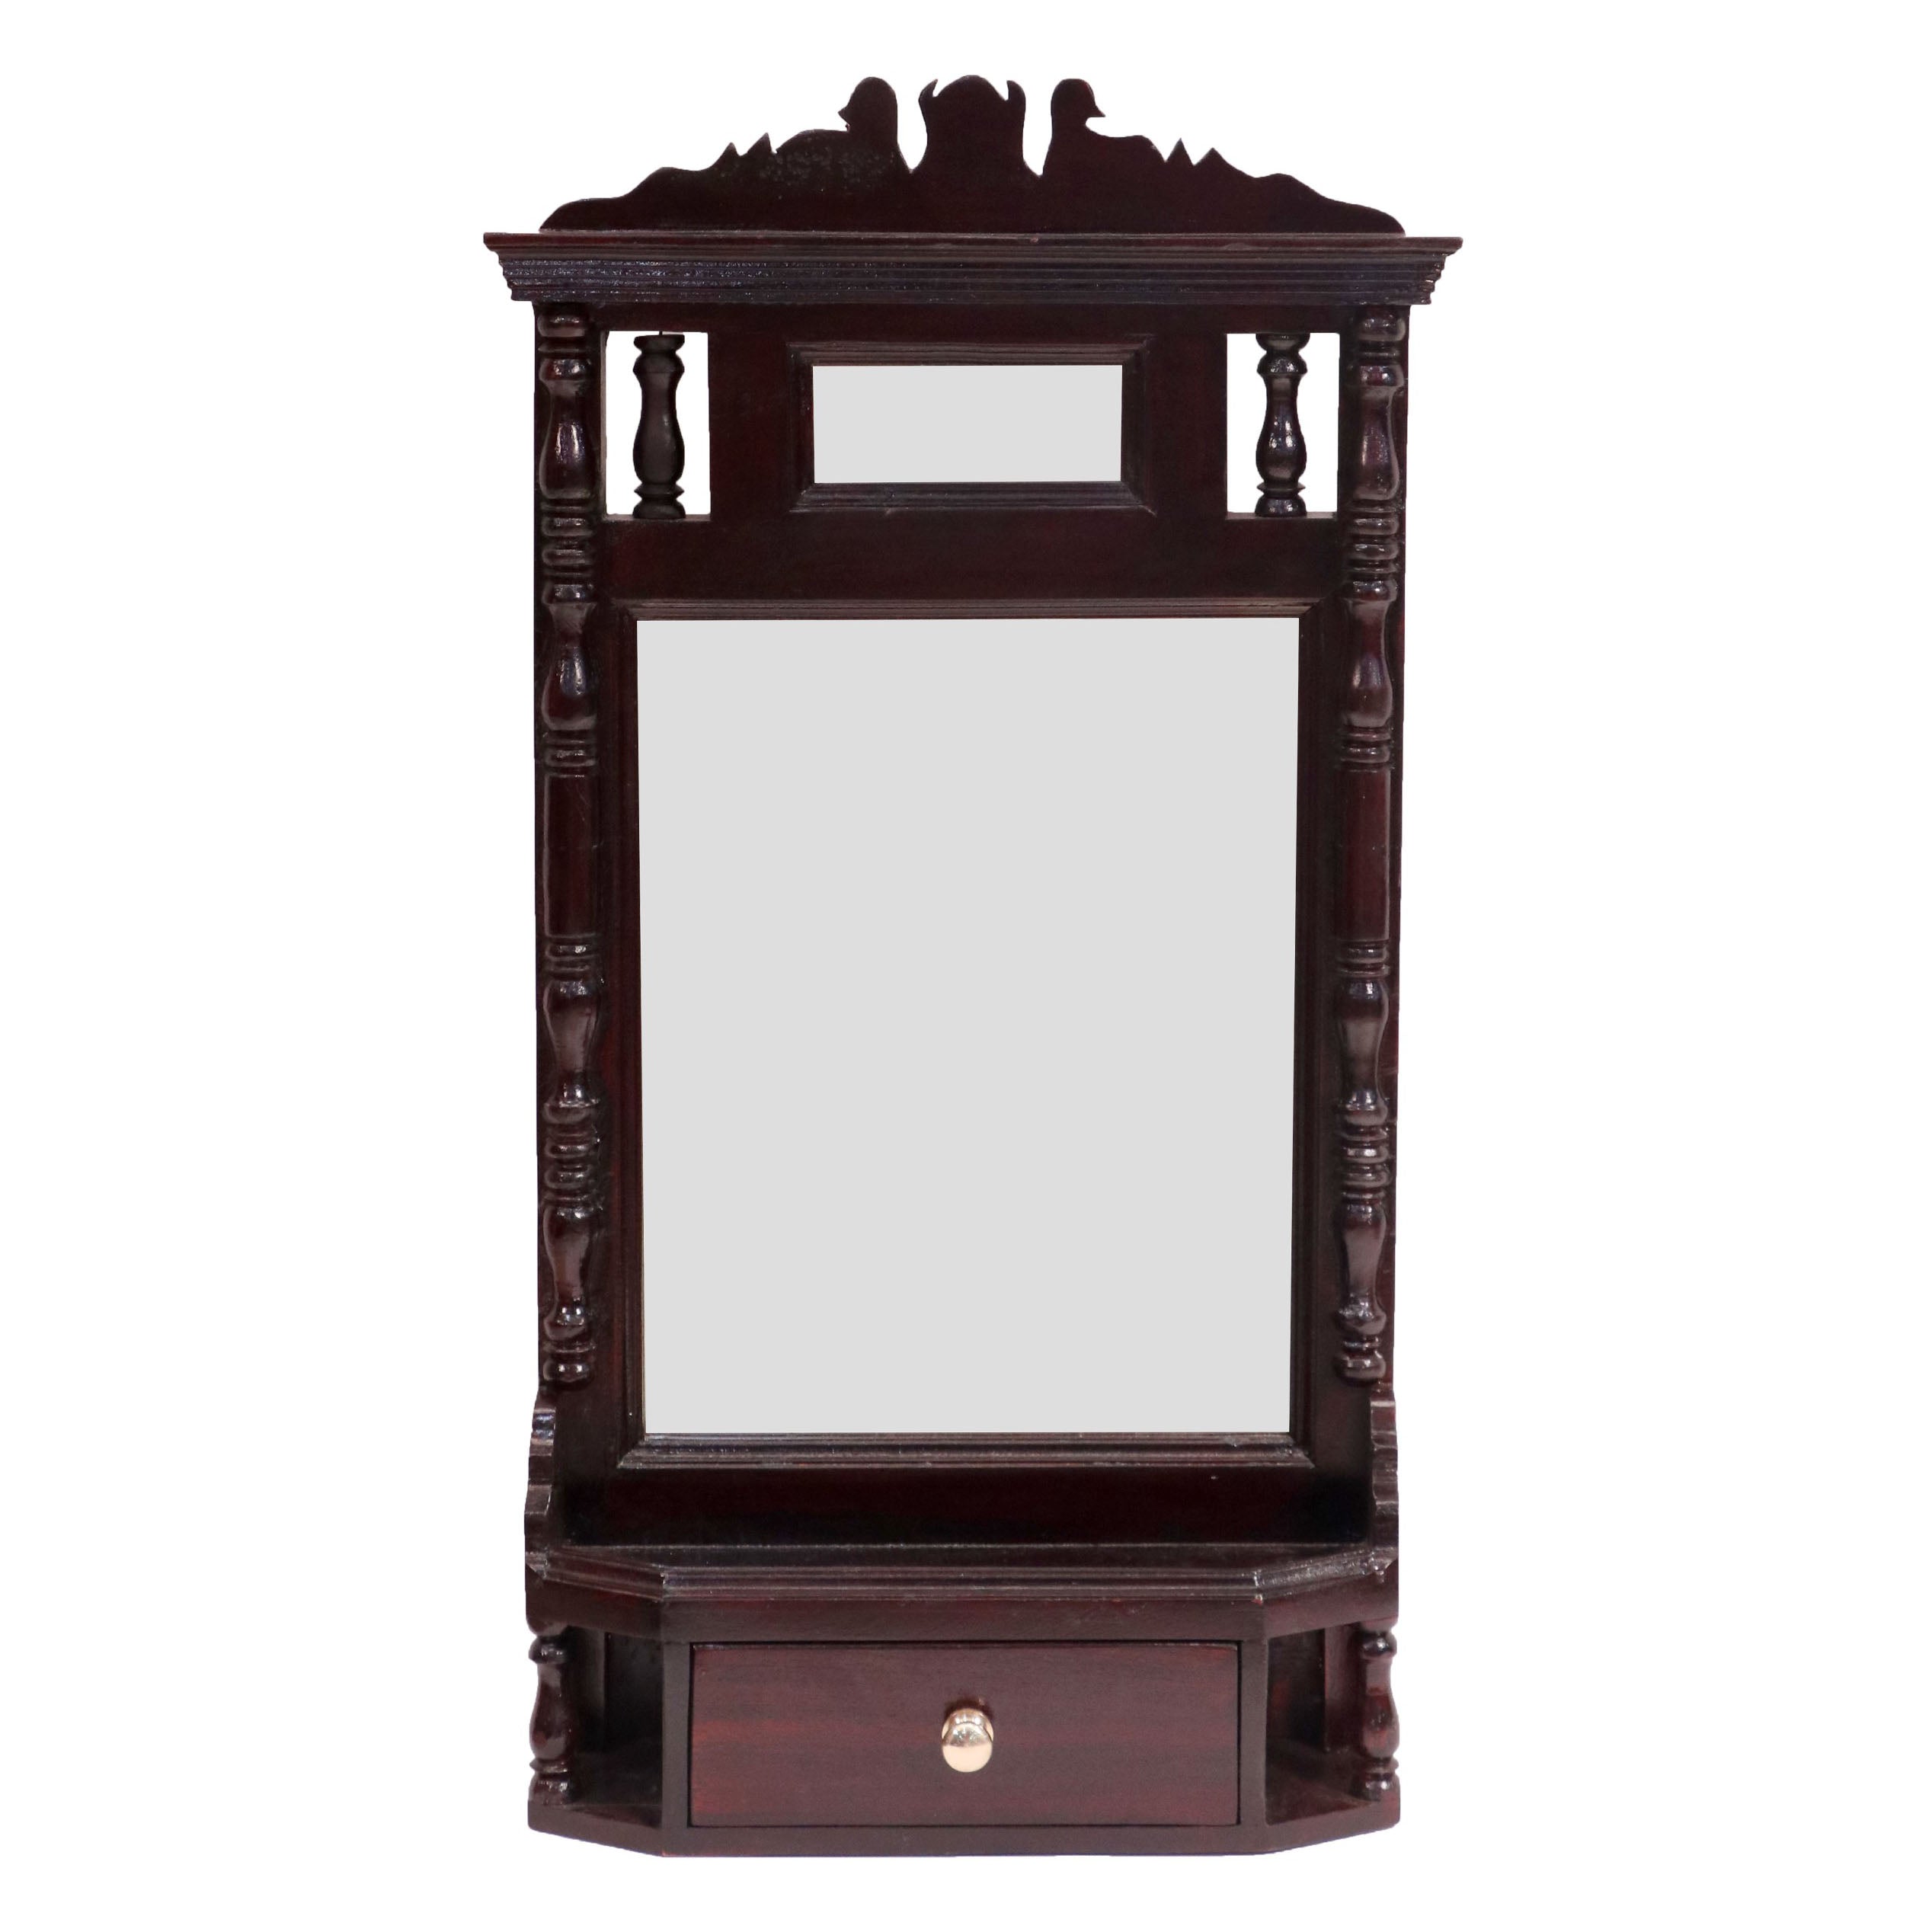 Classical Wooden Southern Mirror Mirror